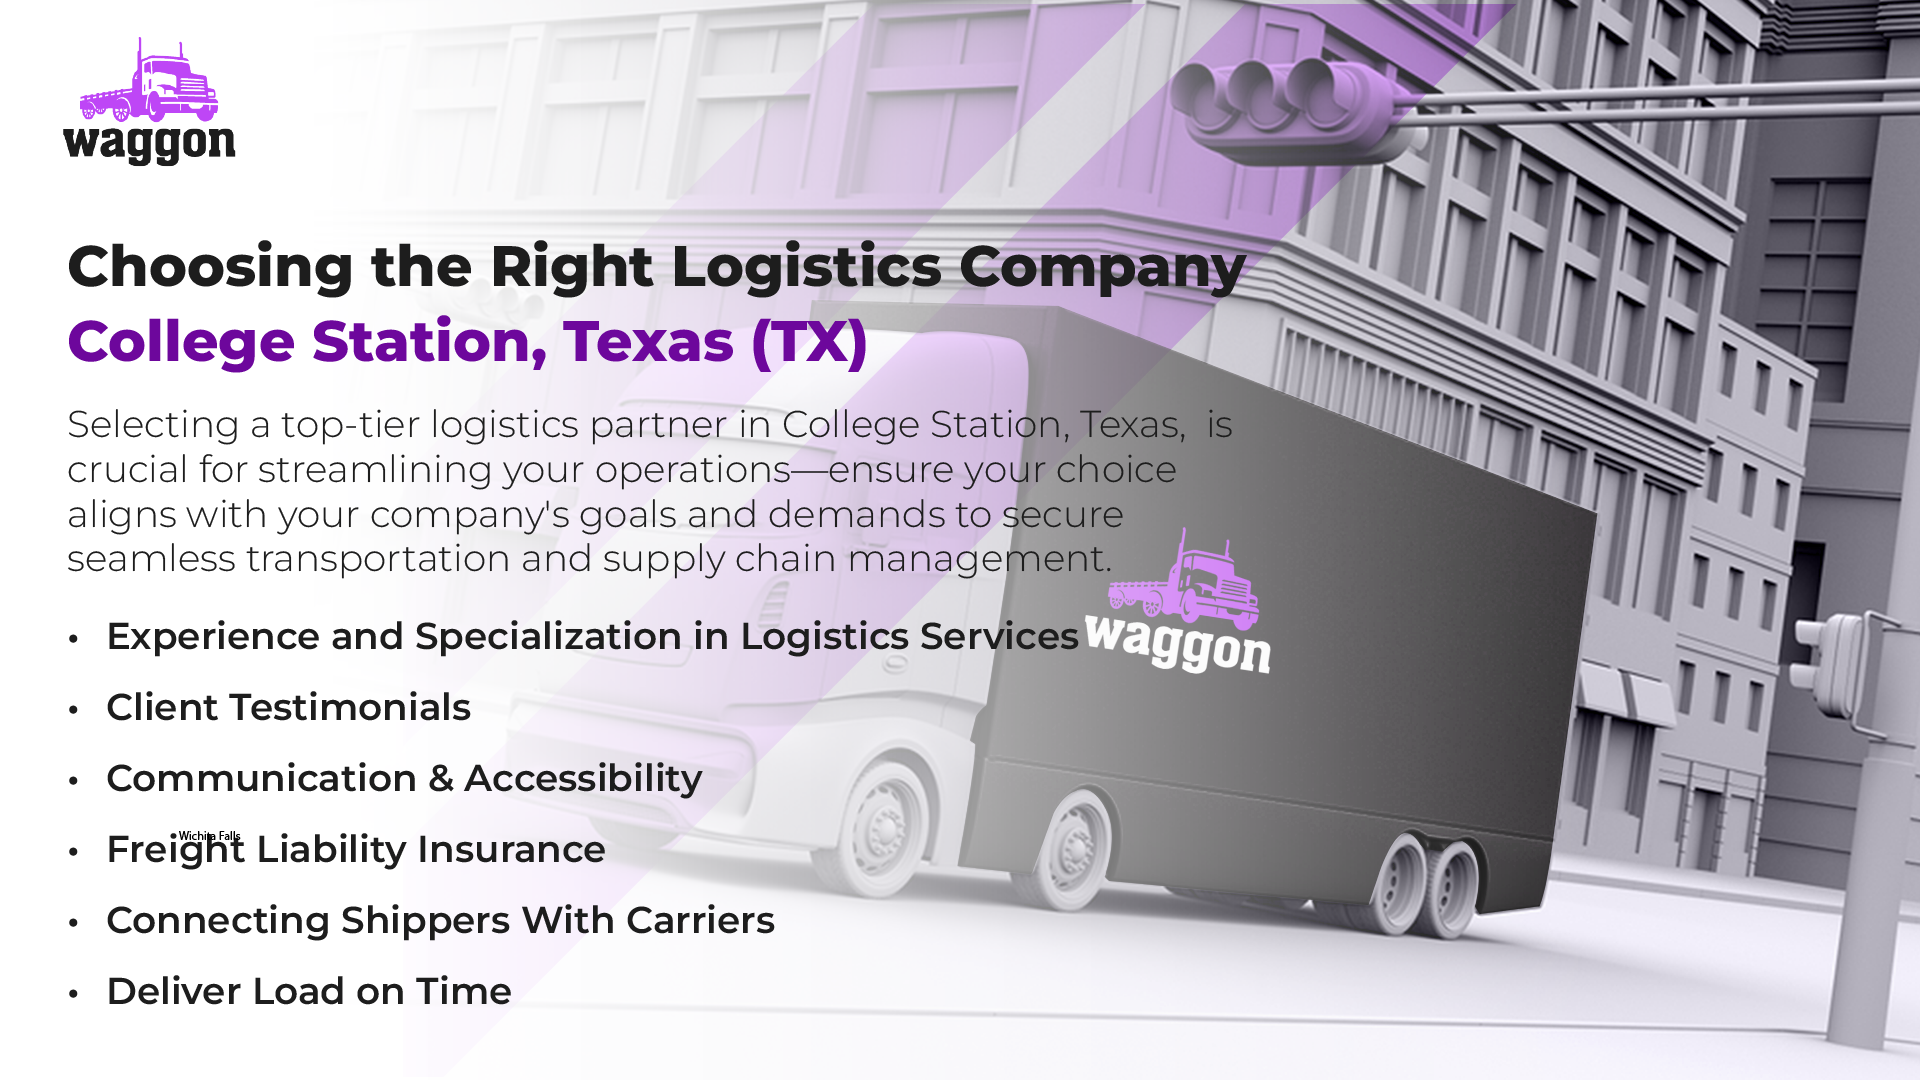 Choosing the Right Logistics Company in College Station, Texas (TX)